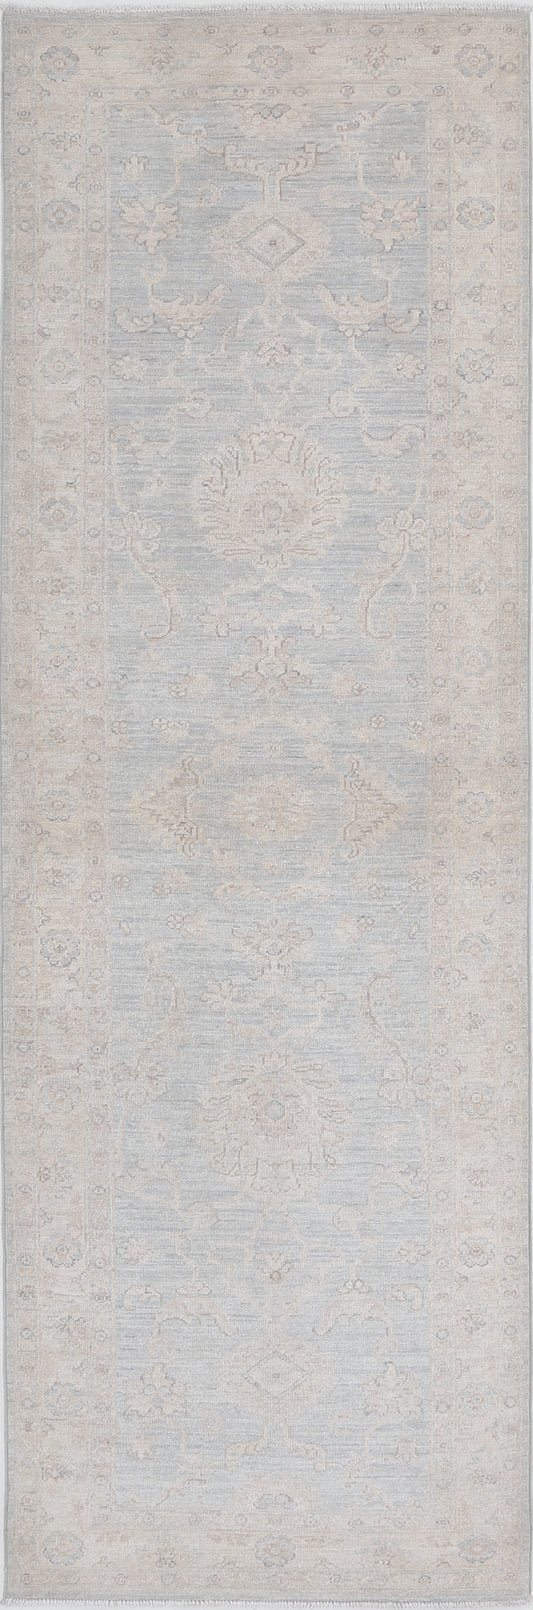 Hand Knotted Serenity Wool Rug - 2'8'' x 6'3''